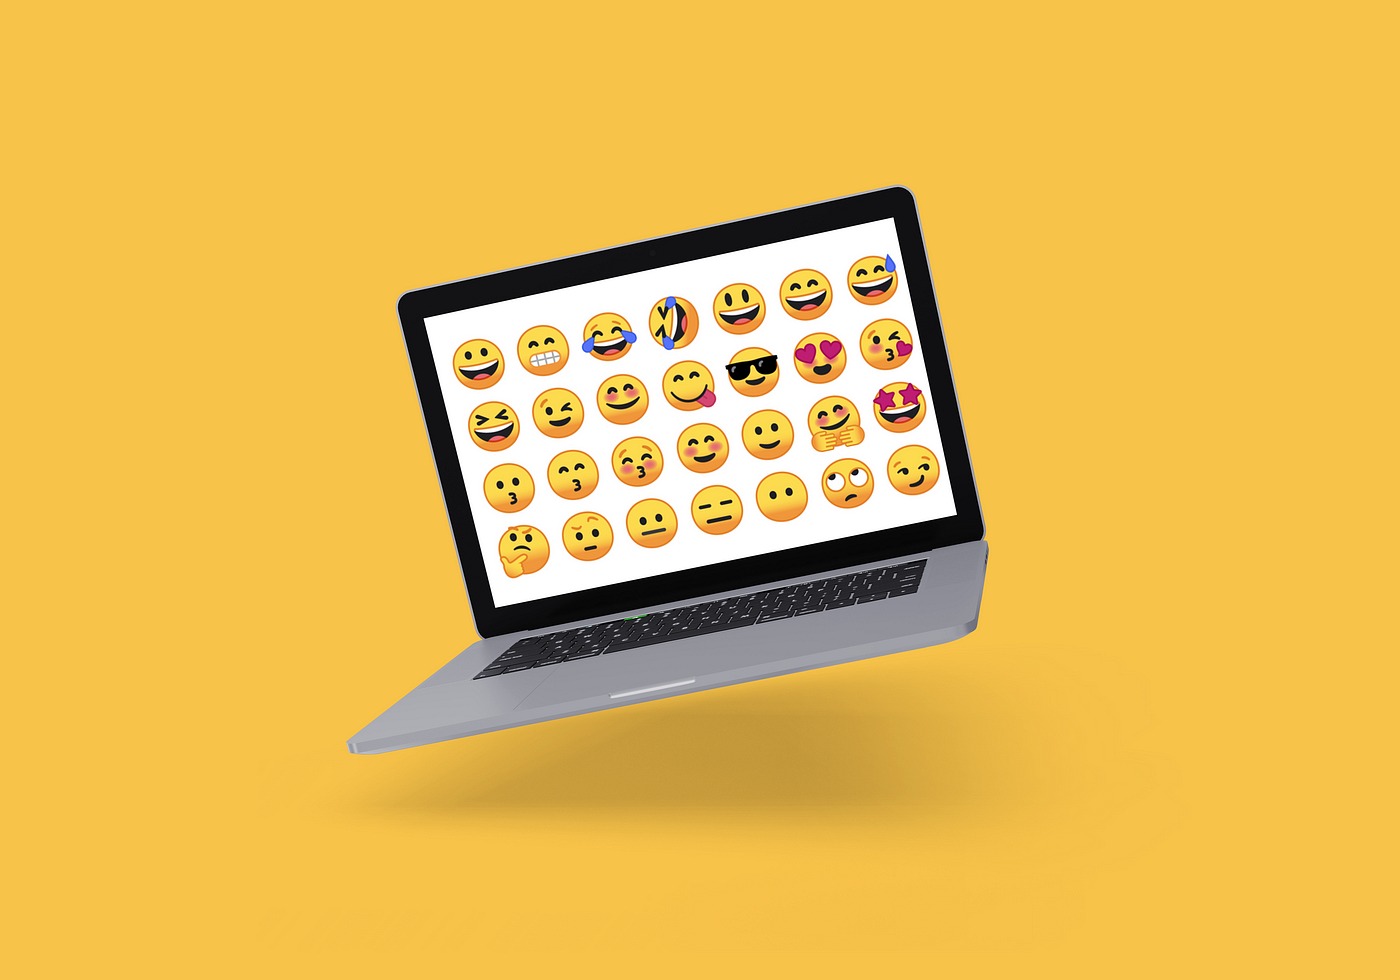 How To Get Emojis On A Laptop